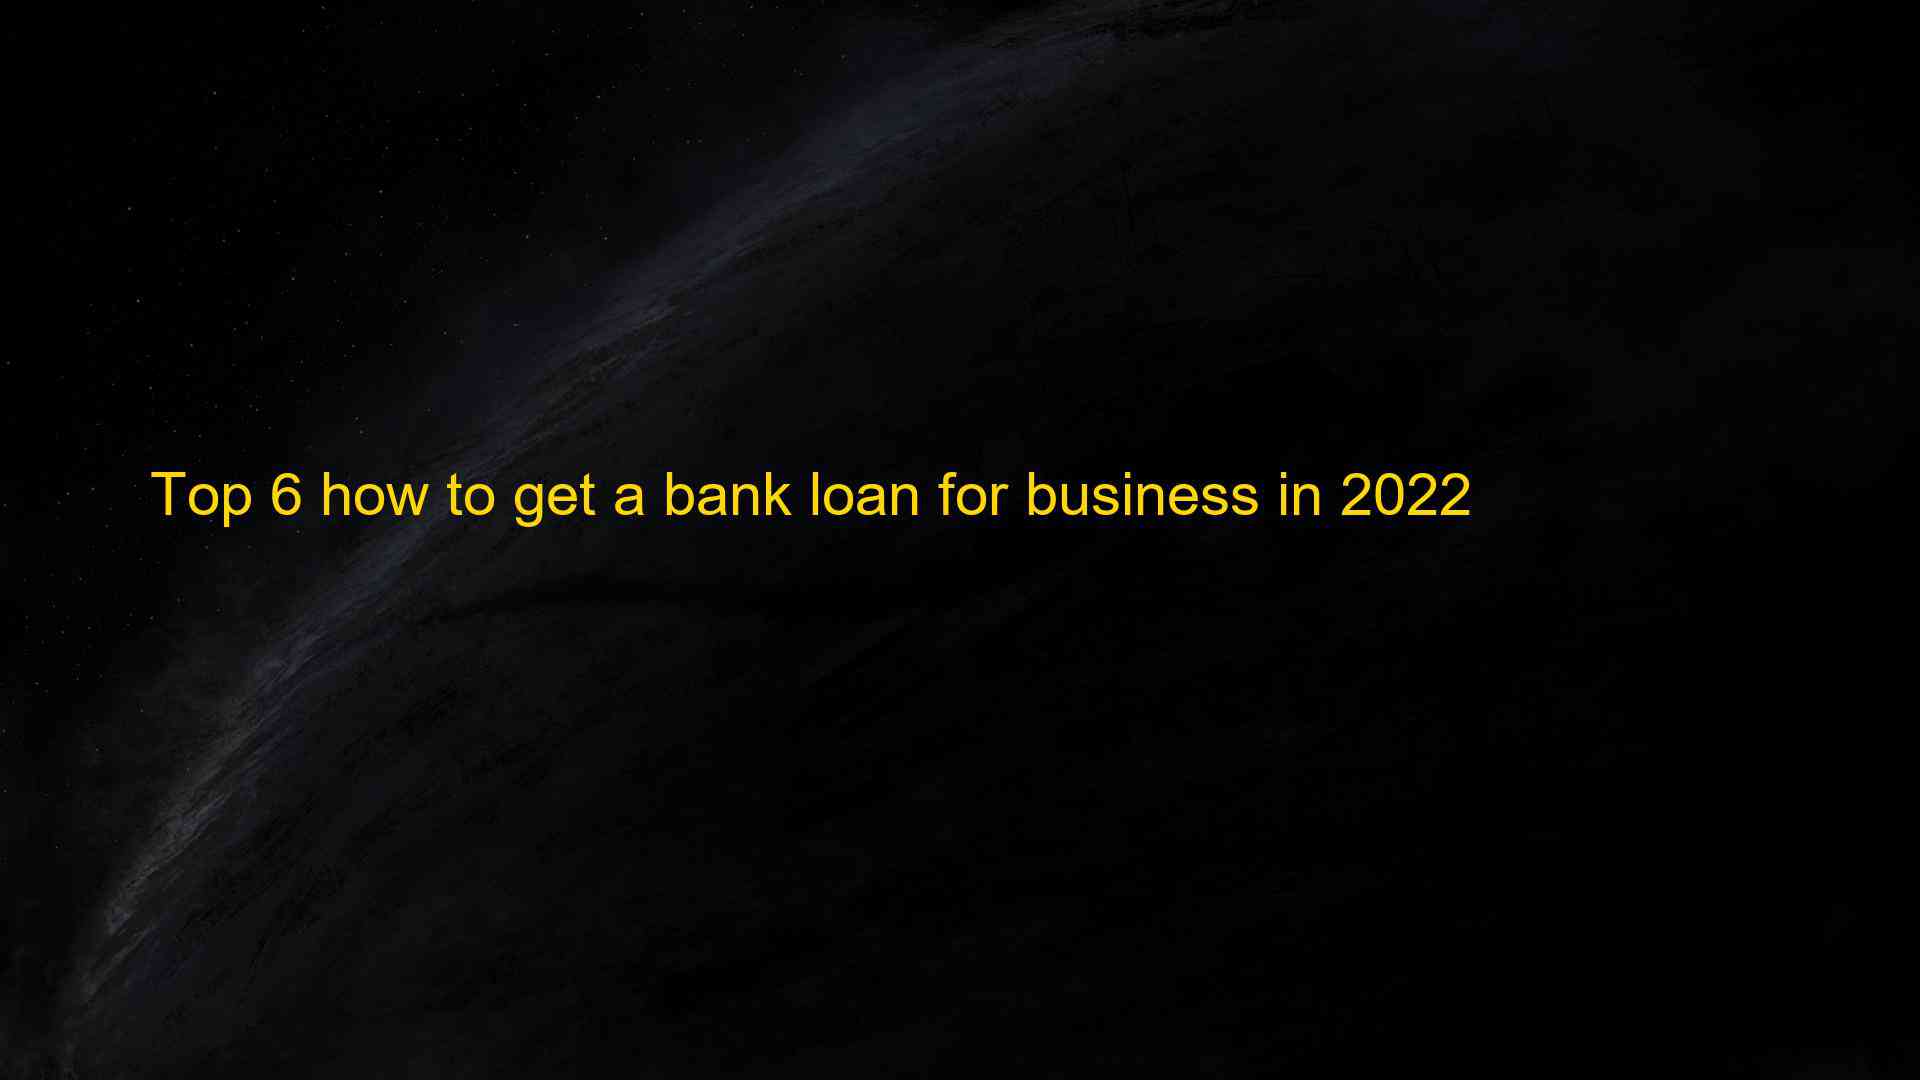 Top 6 how to get a bank loan for business in 2022 1659597593